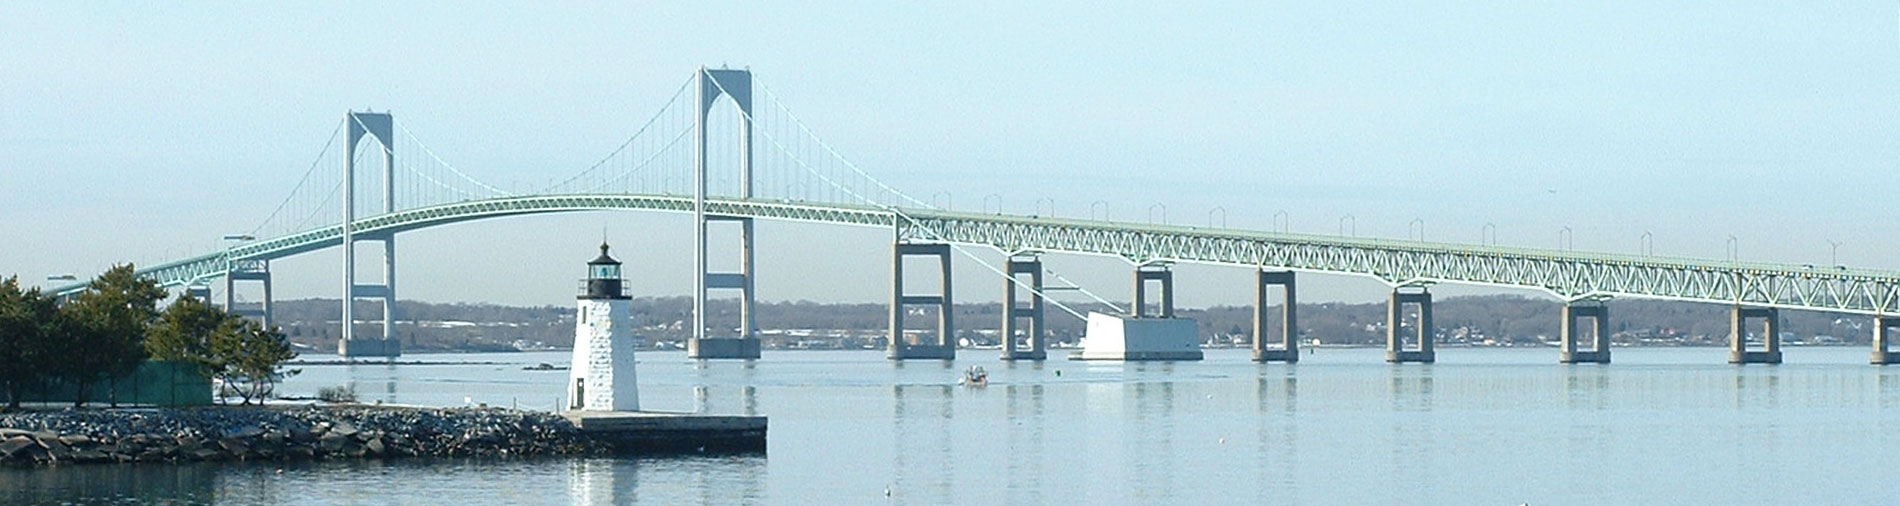 Photo of Narragansett Bay and Clairborne Pell (Newport) Bridge in the distance. The sky is clear and the water calm.